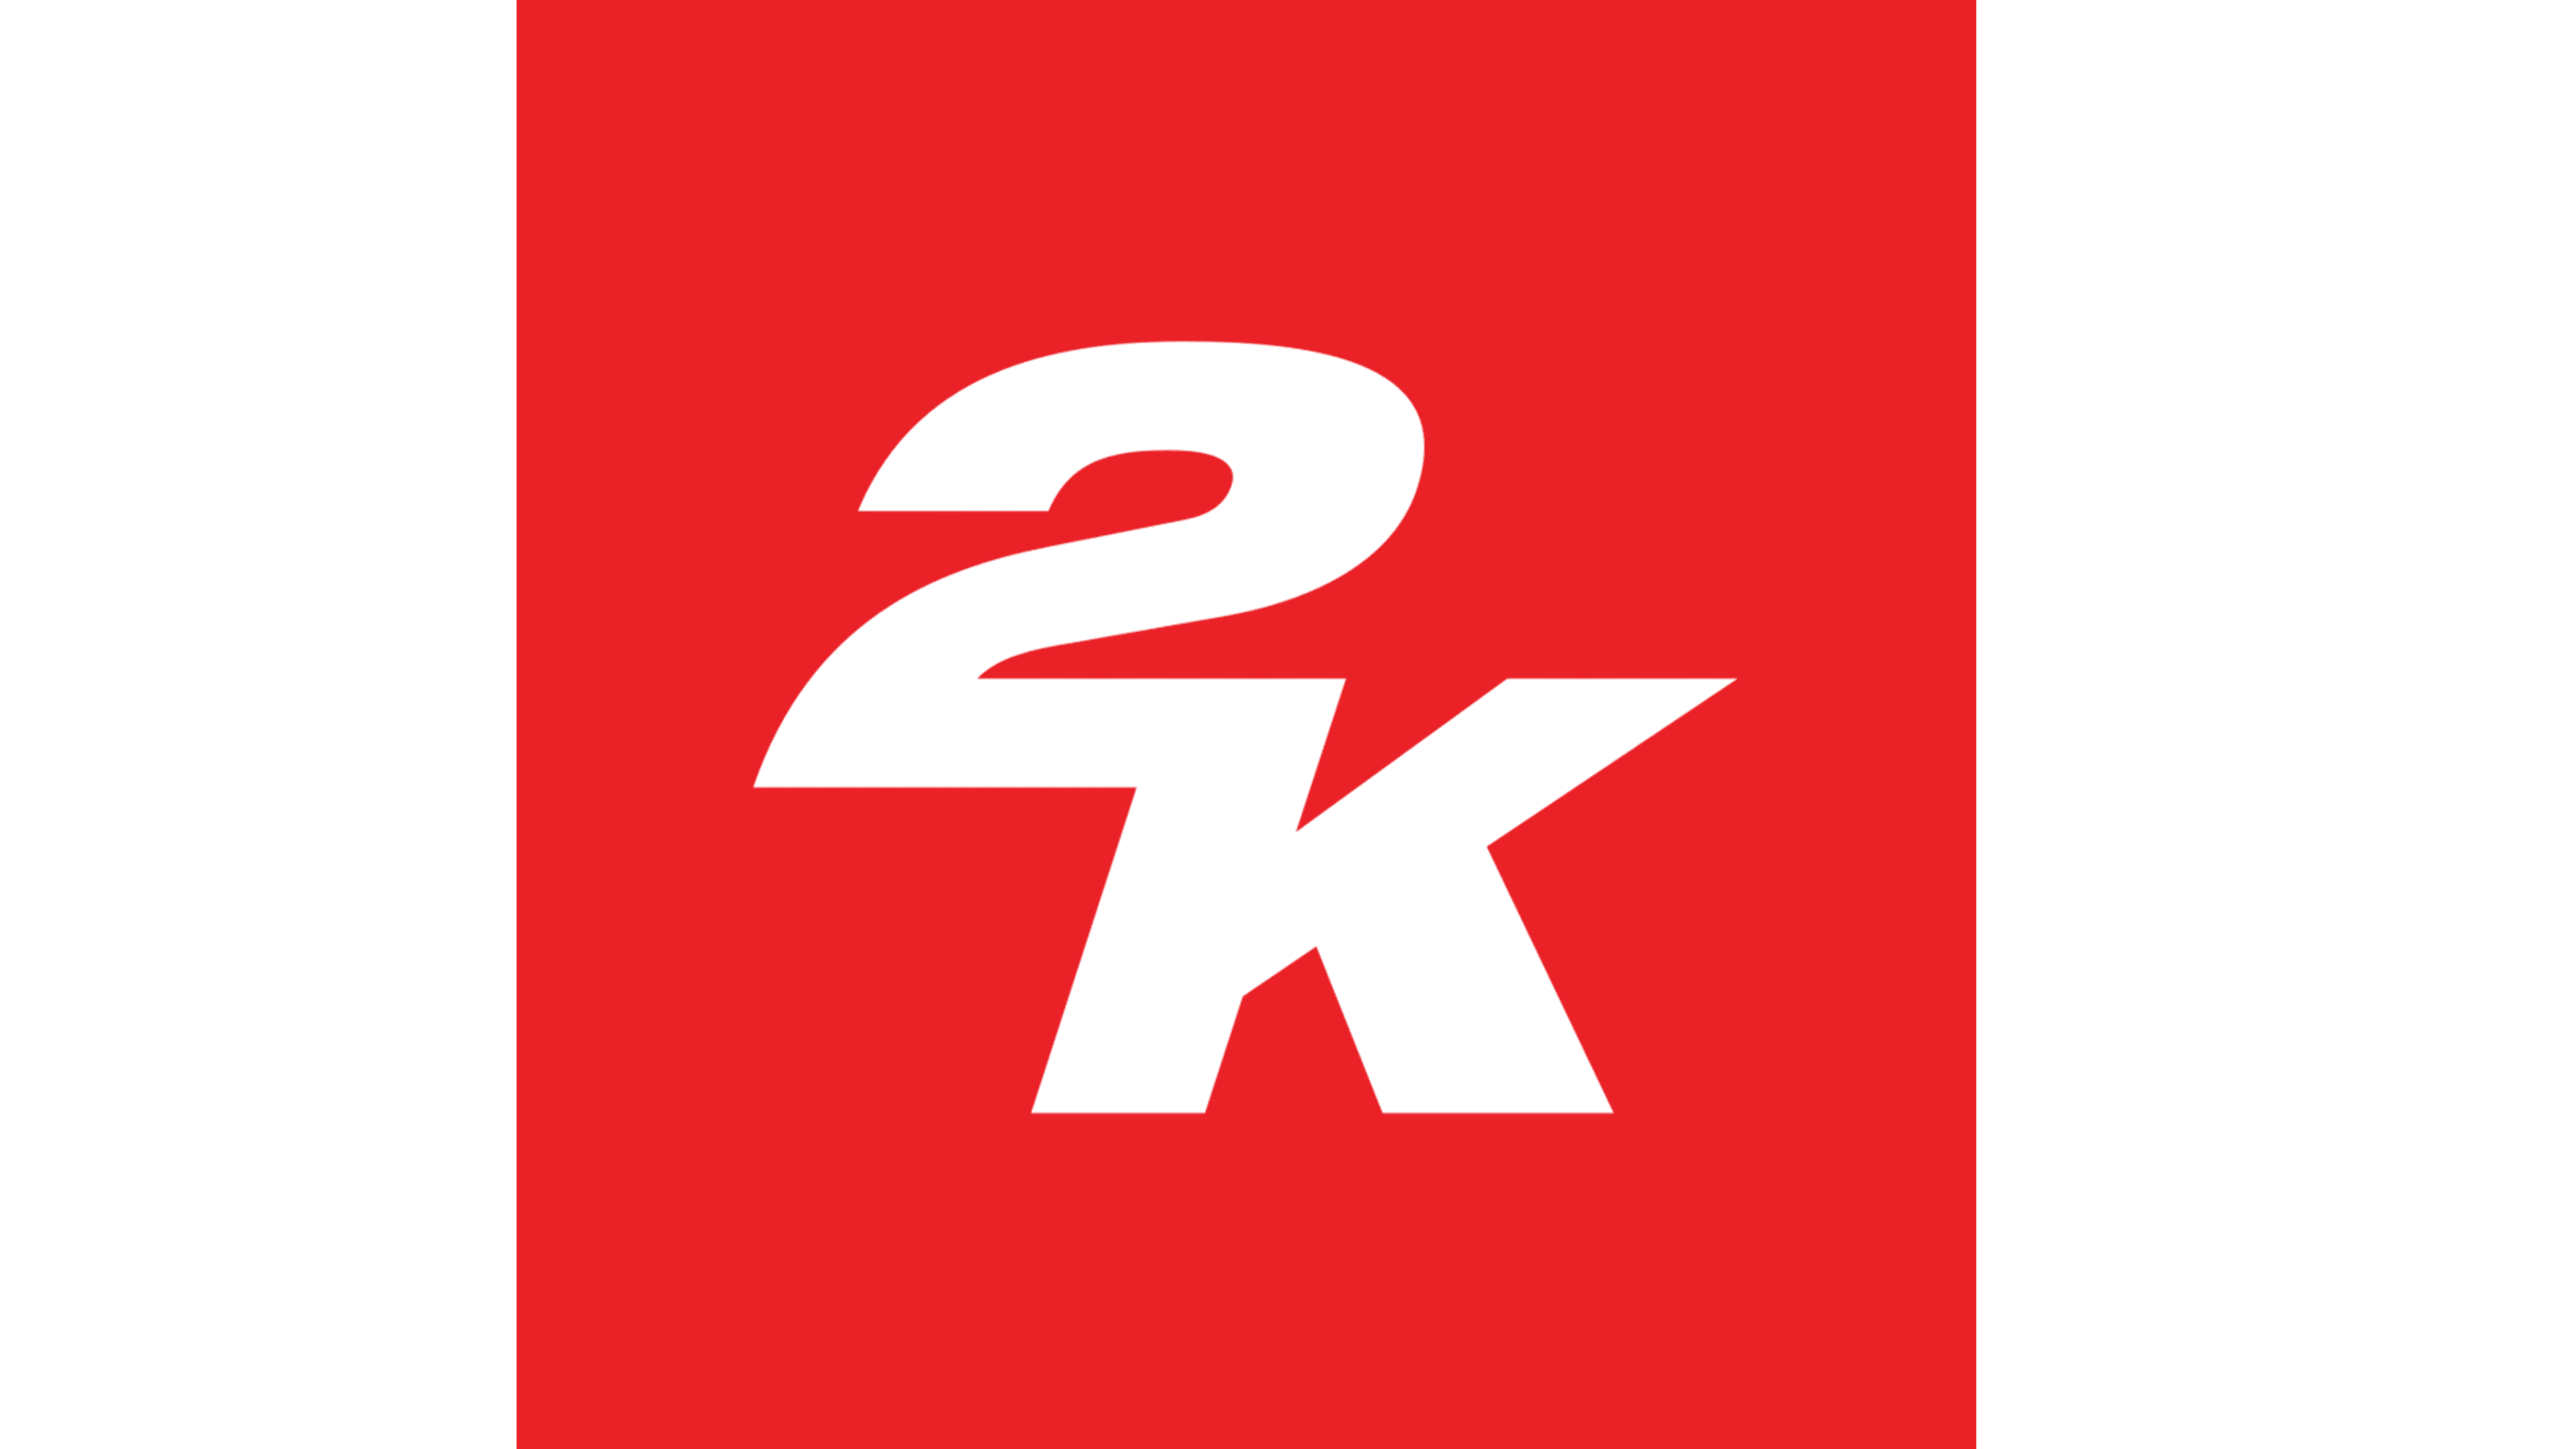 2k-logo-and-symbol-meaning-history-png-brand